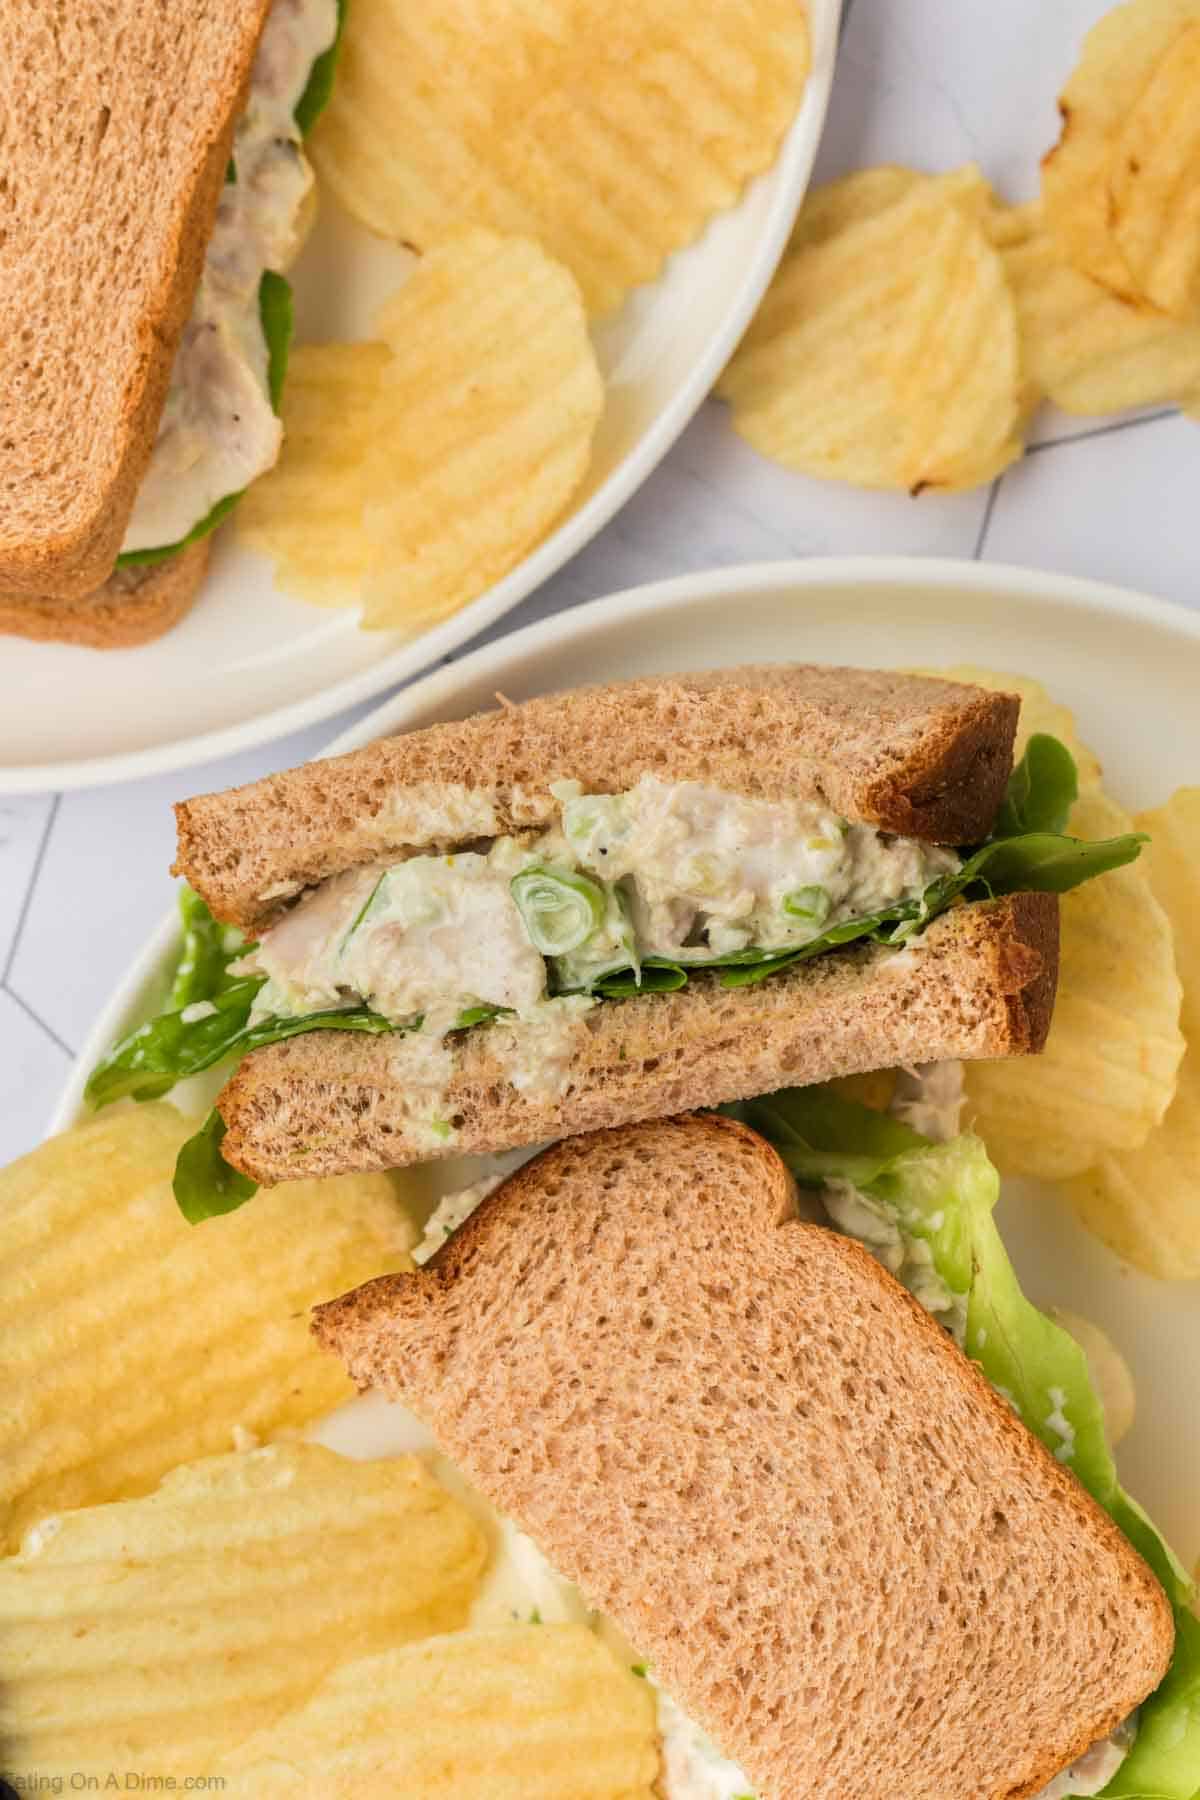 A close-up shot of two plates, each showcasing a delicious tuna salad sandwich recipe made with whole wheat bread, lettuce, and green onions. The sandwiches are cut diagonally and served with ridged potato chips on a white surface.